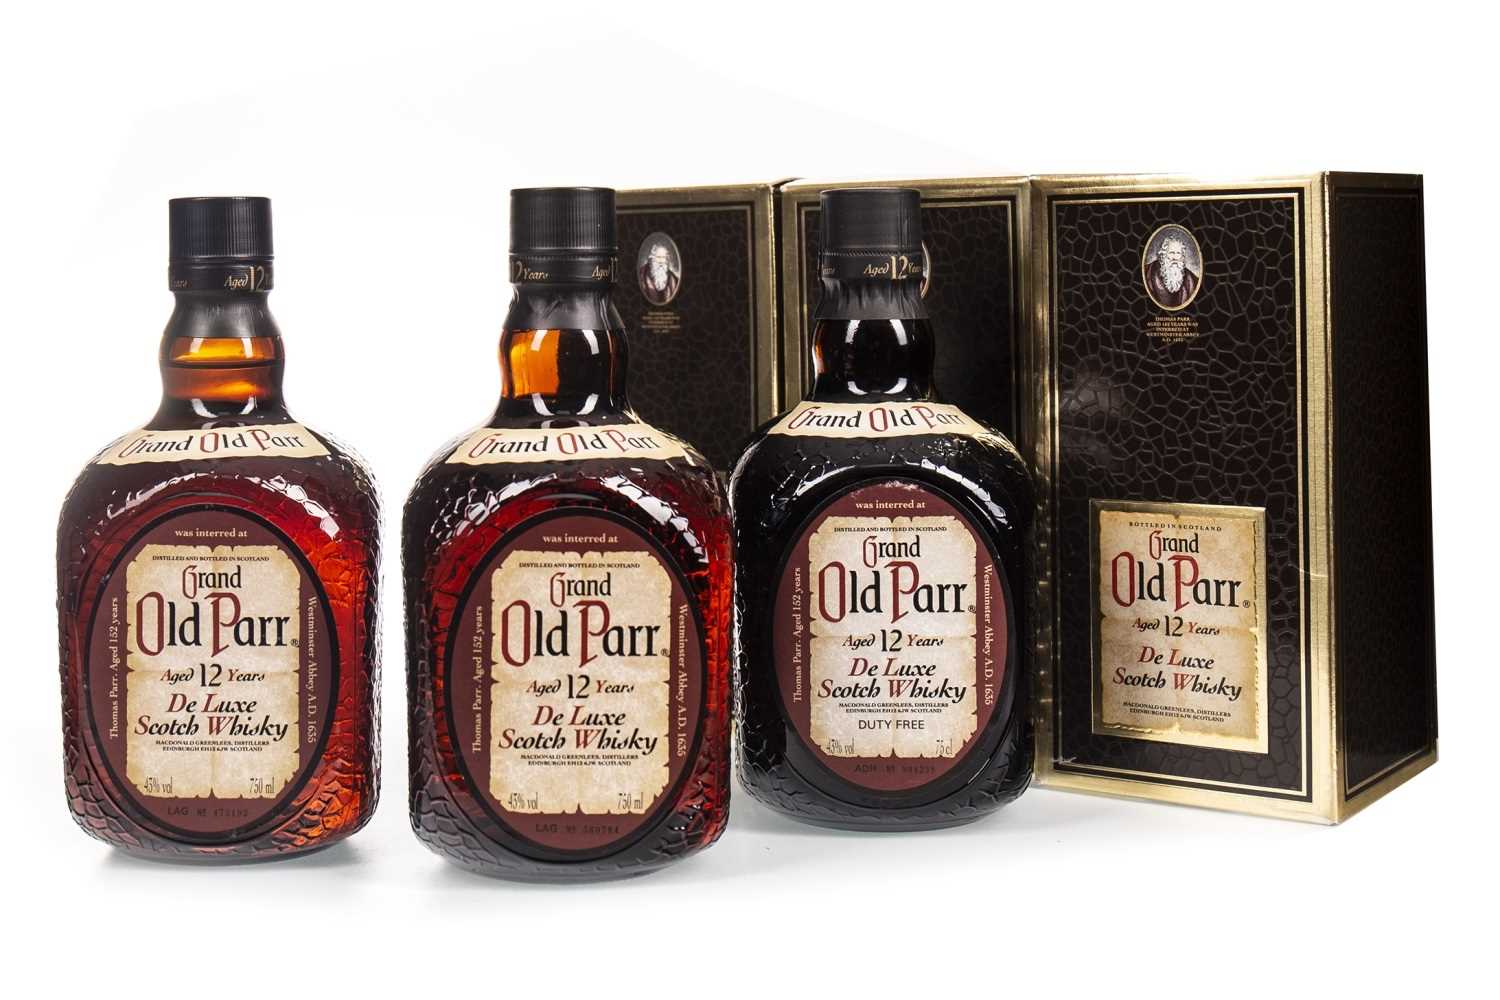 Lot 411 - THREE BOTTLES OF GRAND OLD PARR AGED 12 YEARS